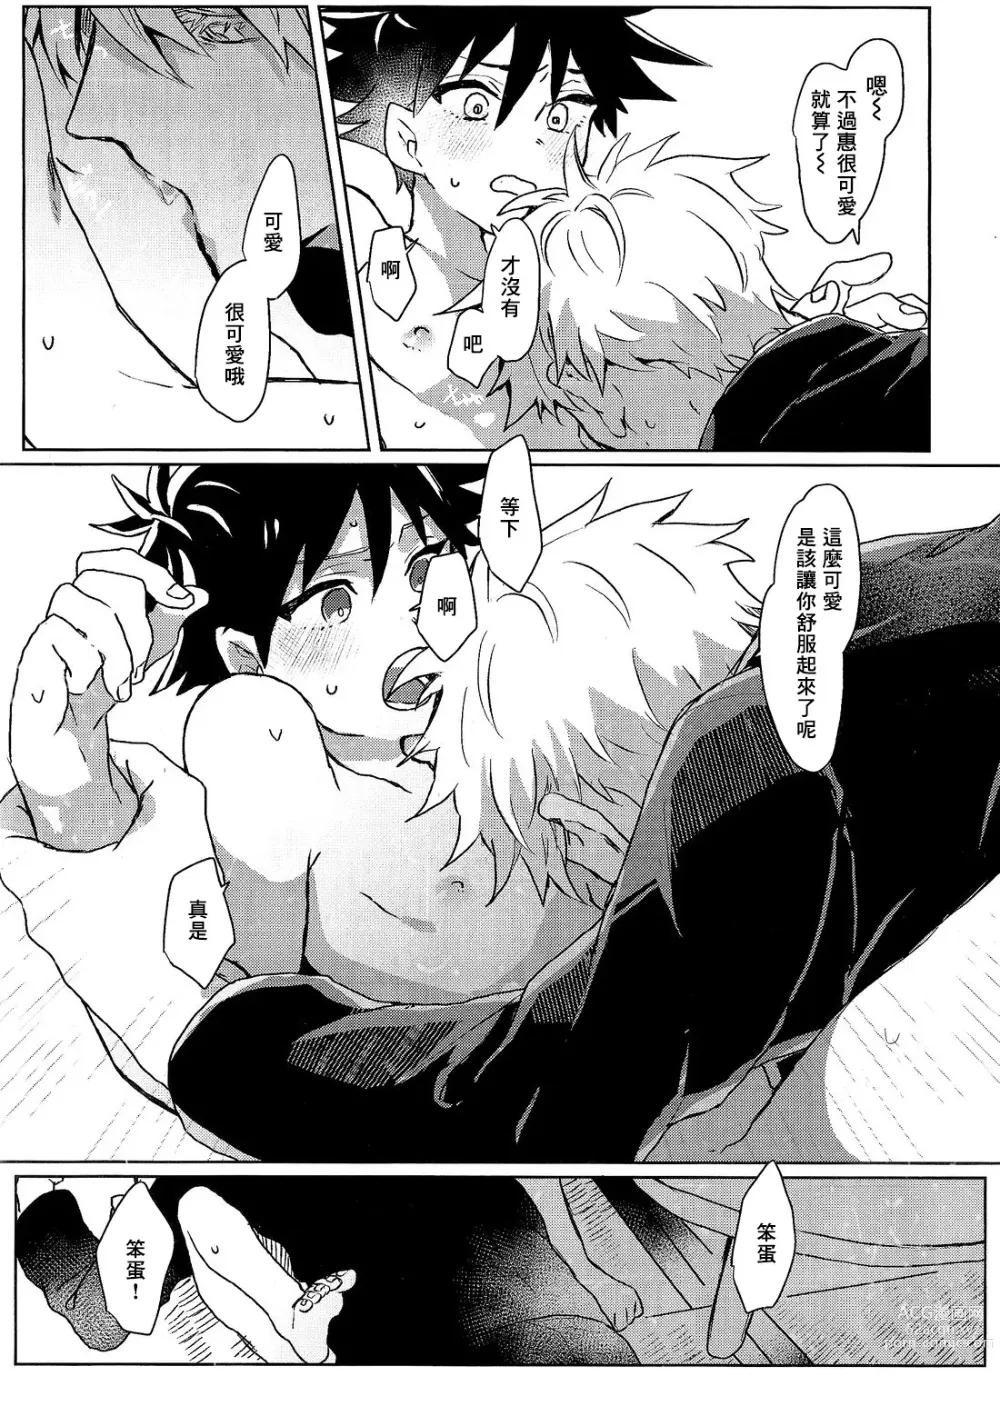 Page 8 of doujinshi Immoralist丨背德者